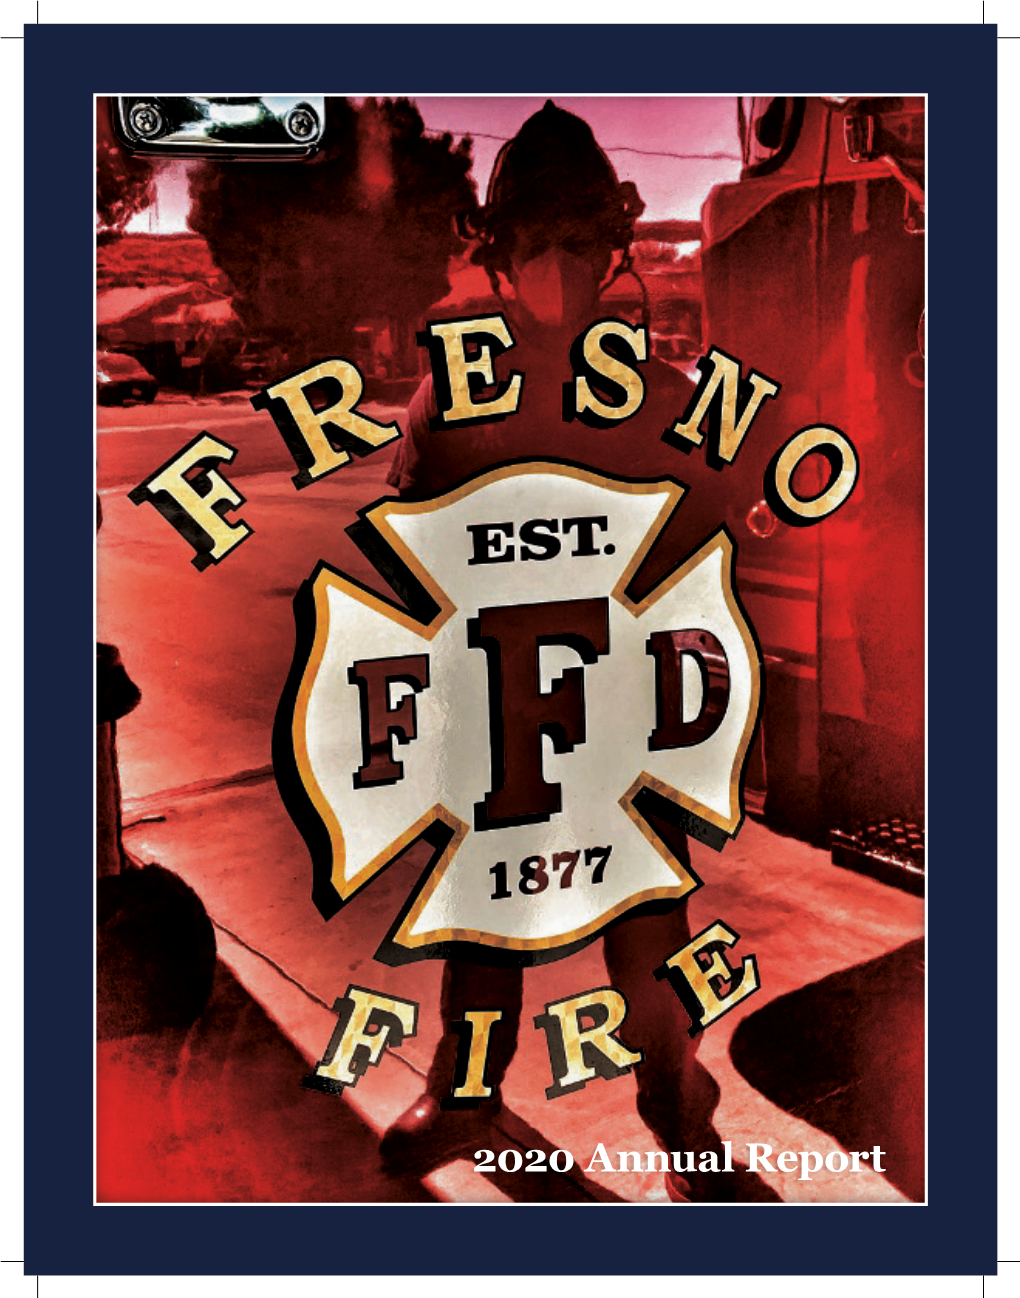 2020 Annual Report FRESNO FIRE DEPARTMENT